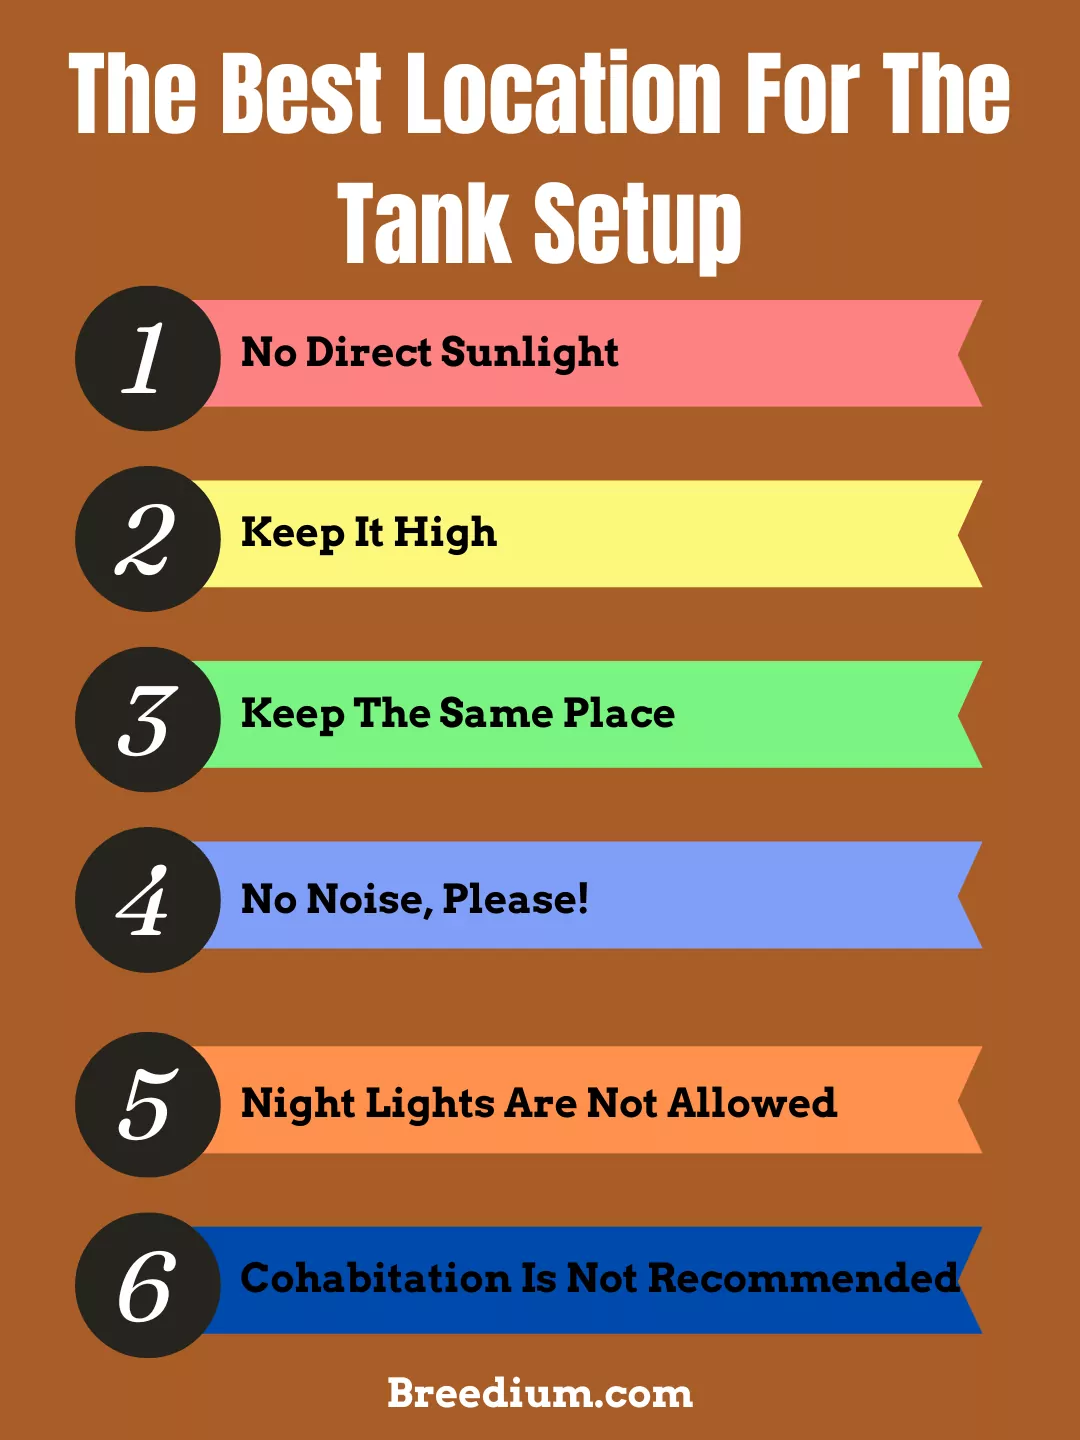 The Best Location For The Tank Setup